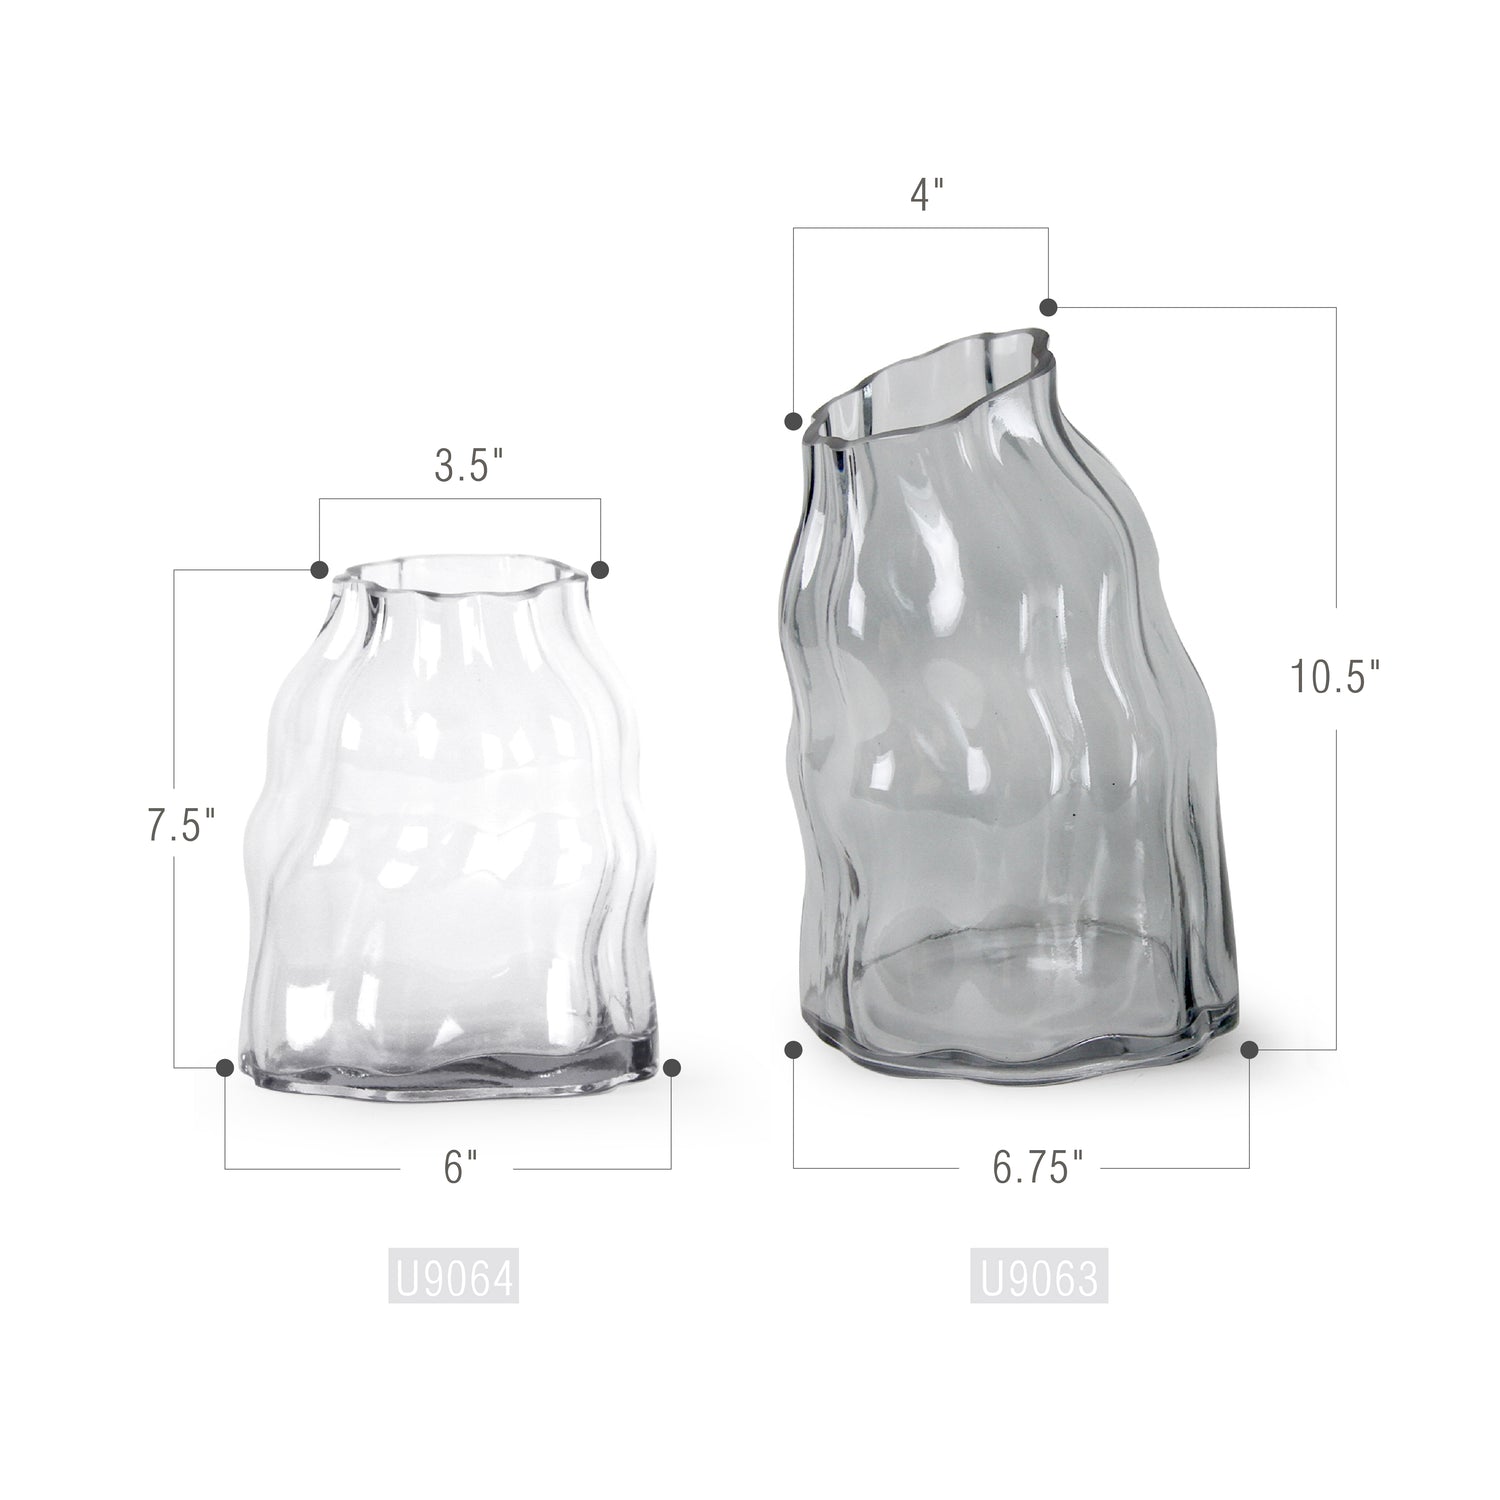 Leaning Towered Glass Vase